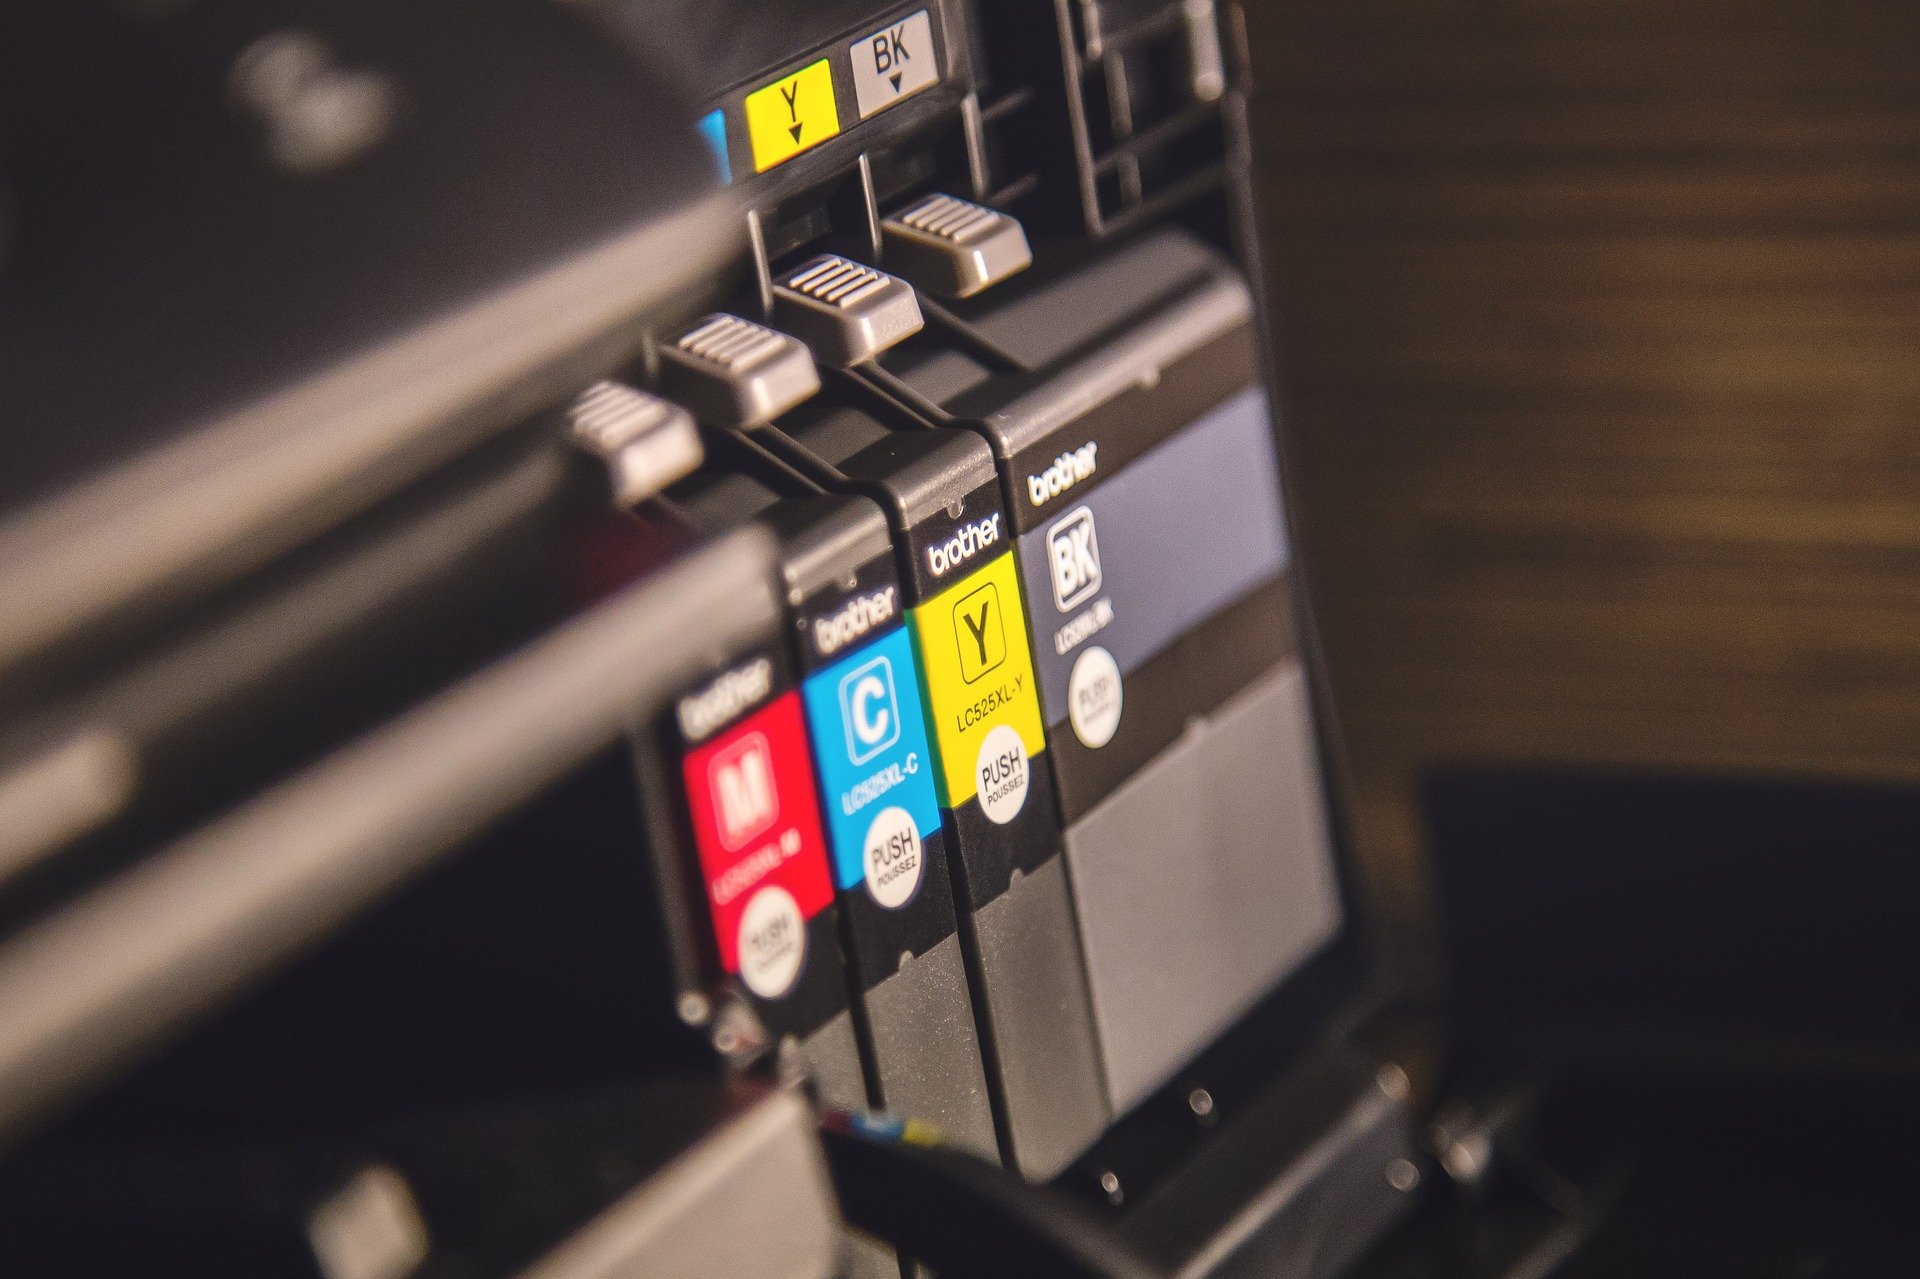 How to Buy Good Quality Printer Cartridges